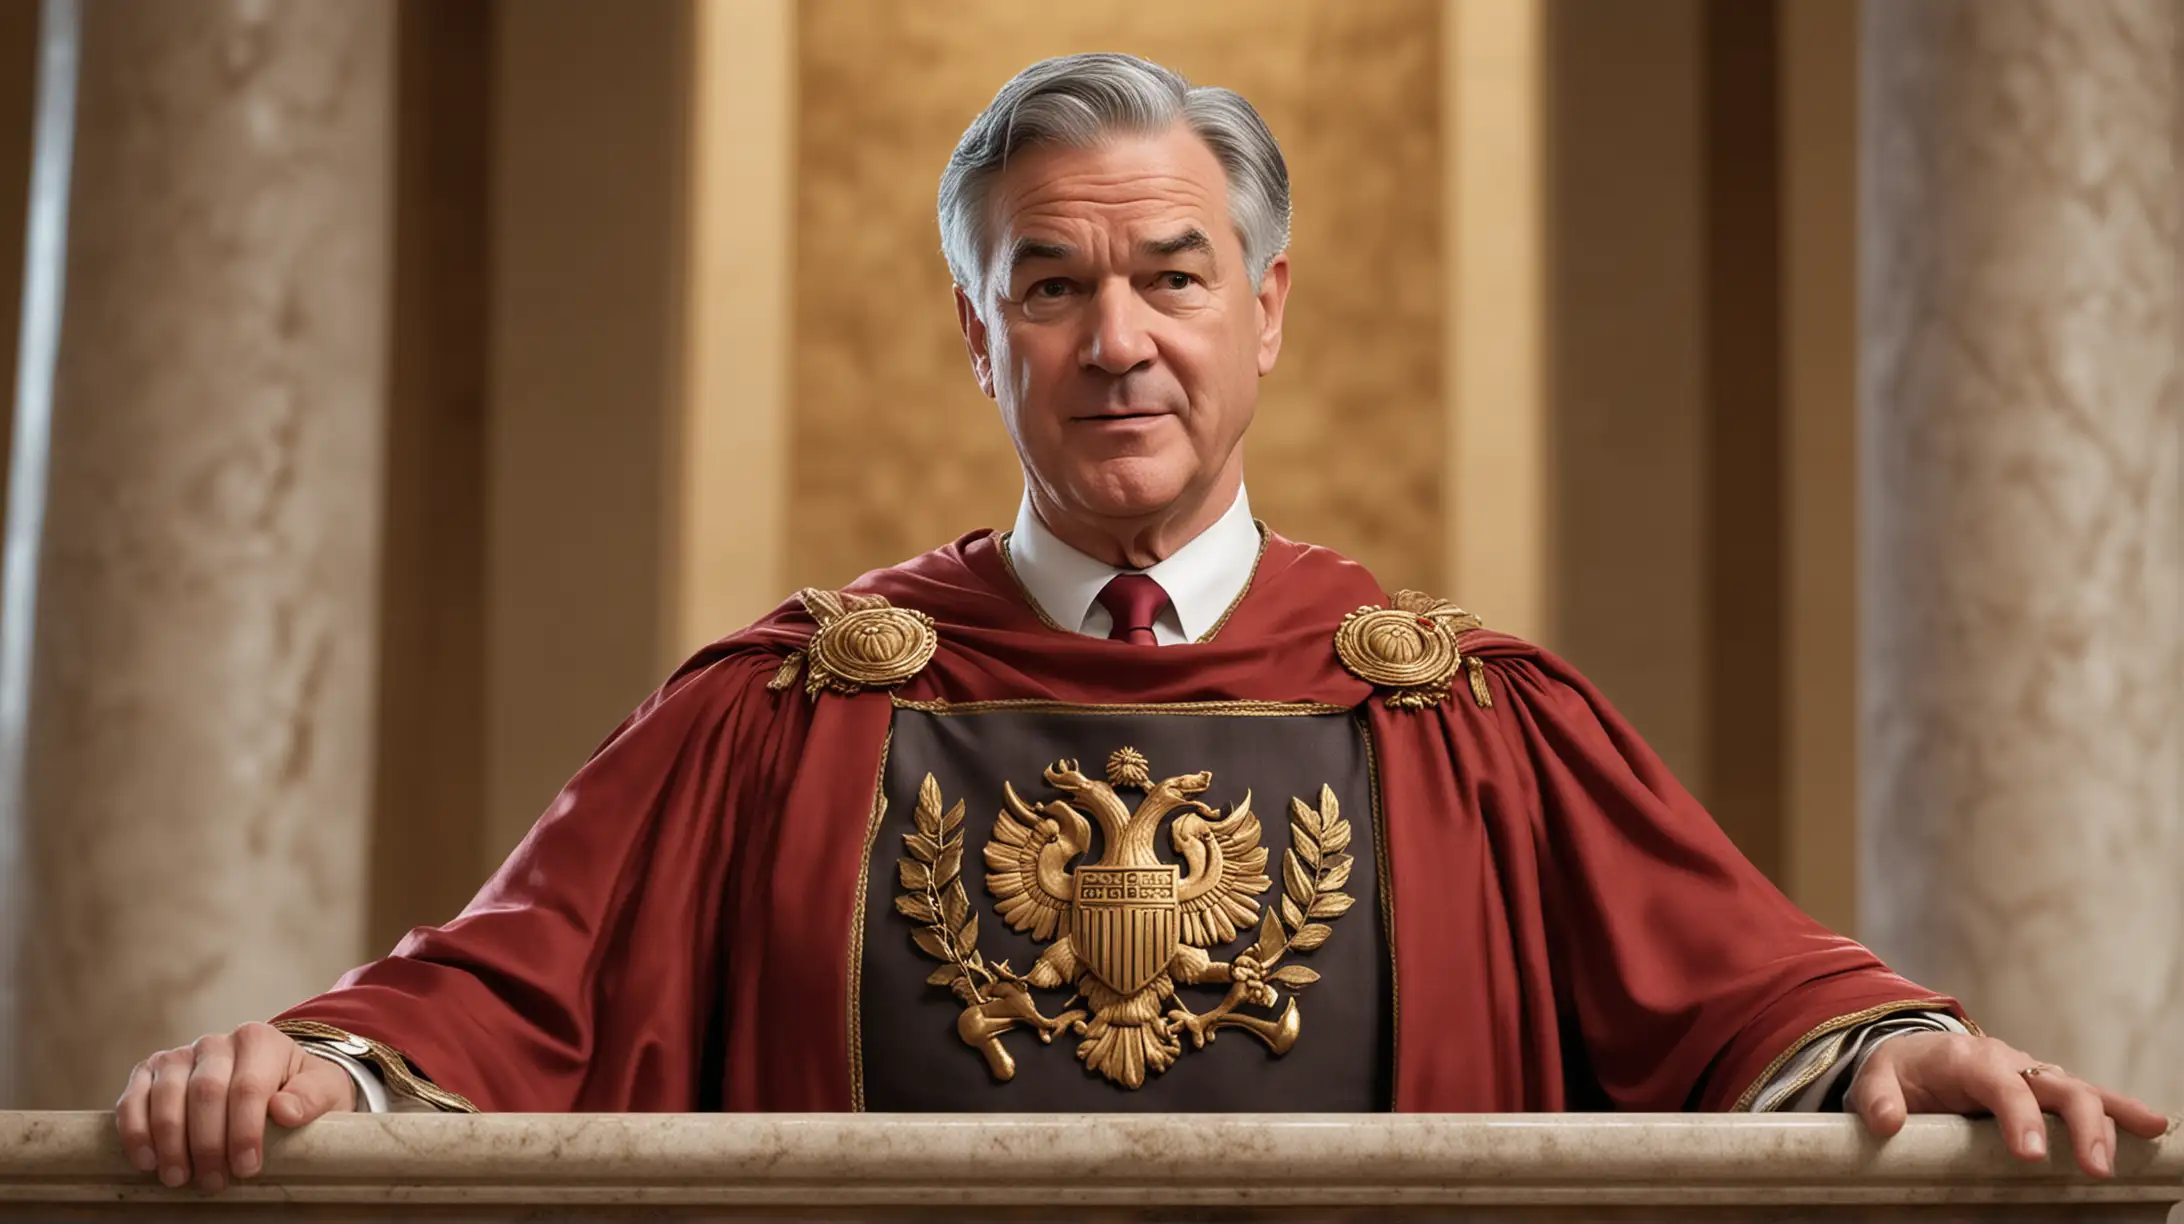 make an image of chairman jerome powell dressed as a roman leader giving an animated 
 and spirited speech